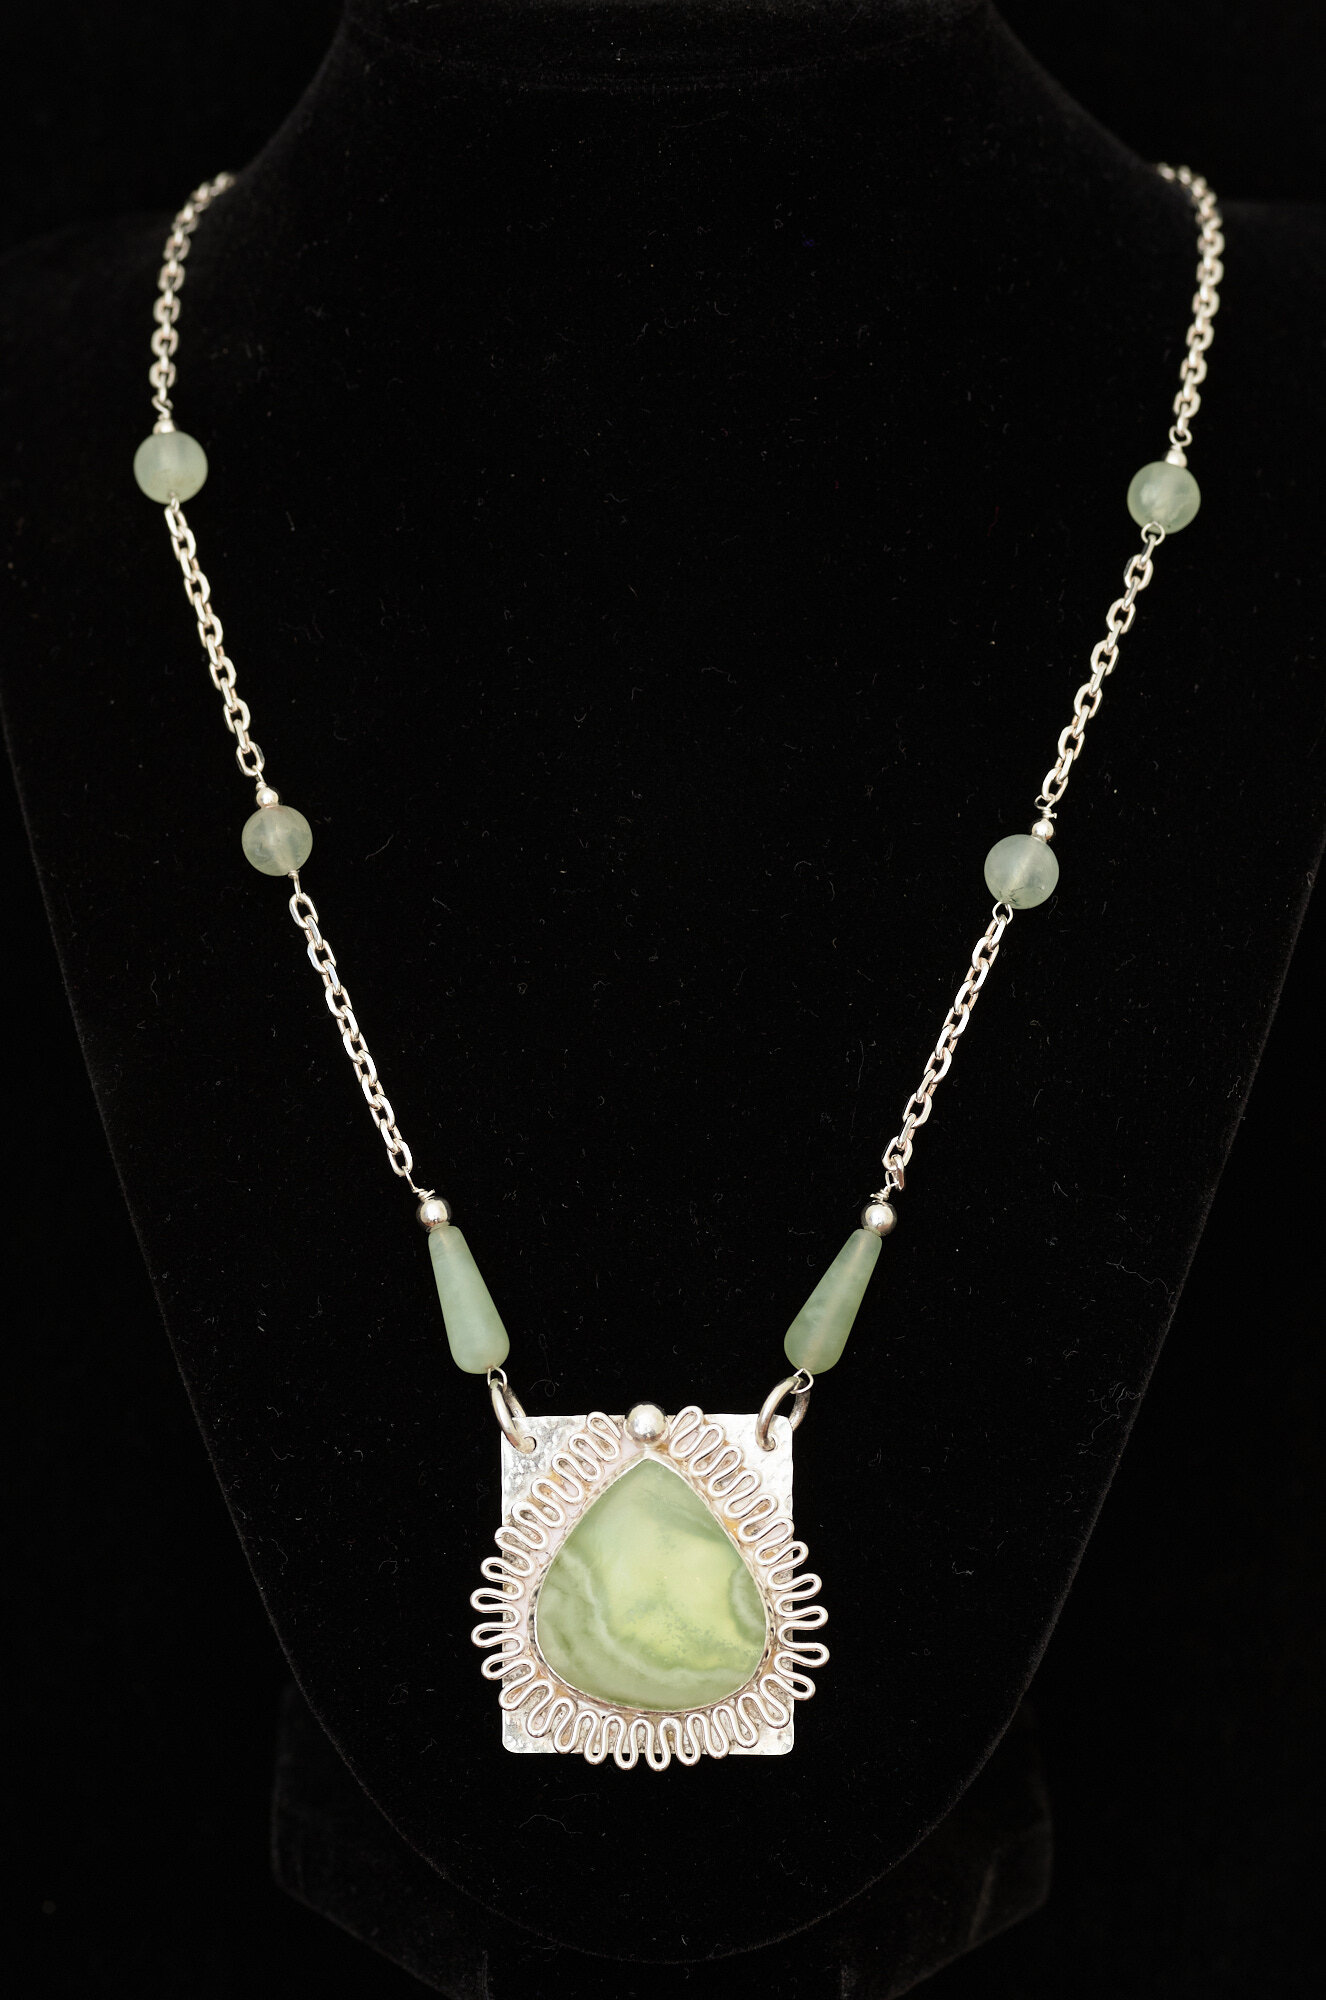  Sage Reynolds  Serpentine necklace  Serpentine with prehenite and agate beads with sterling silver, 2019    